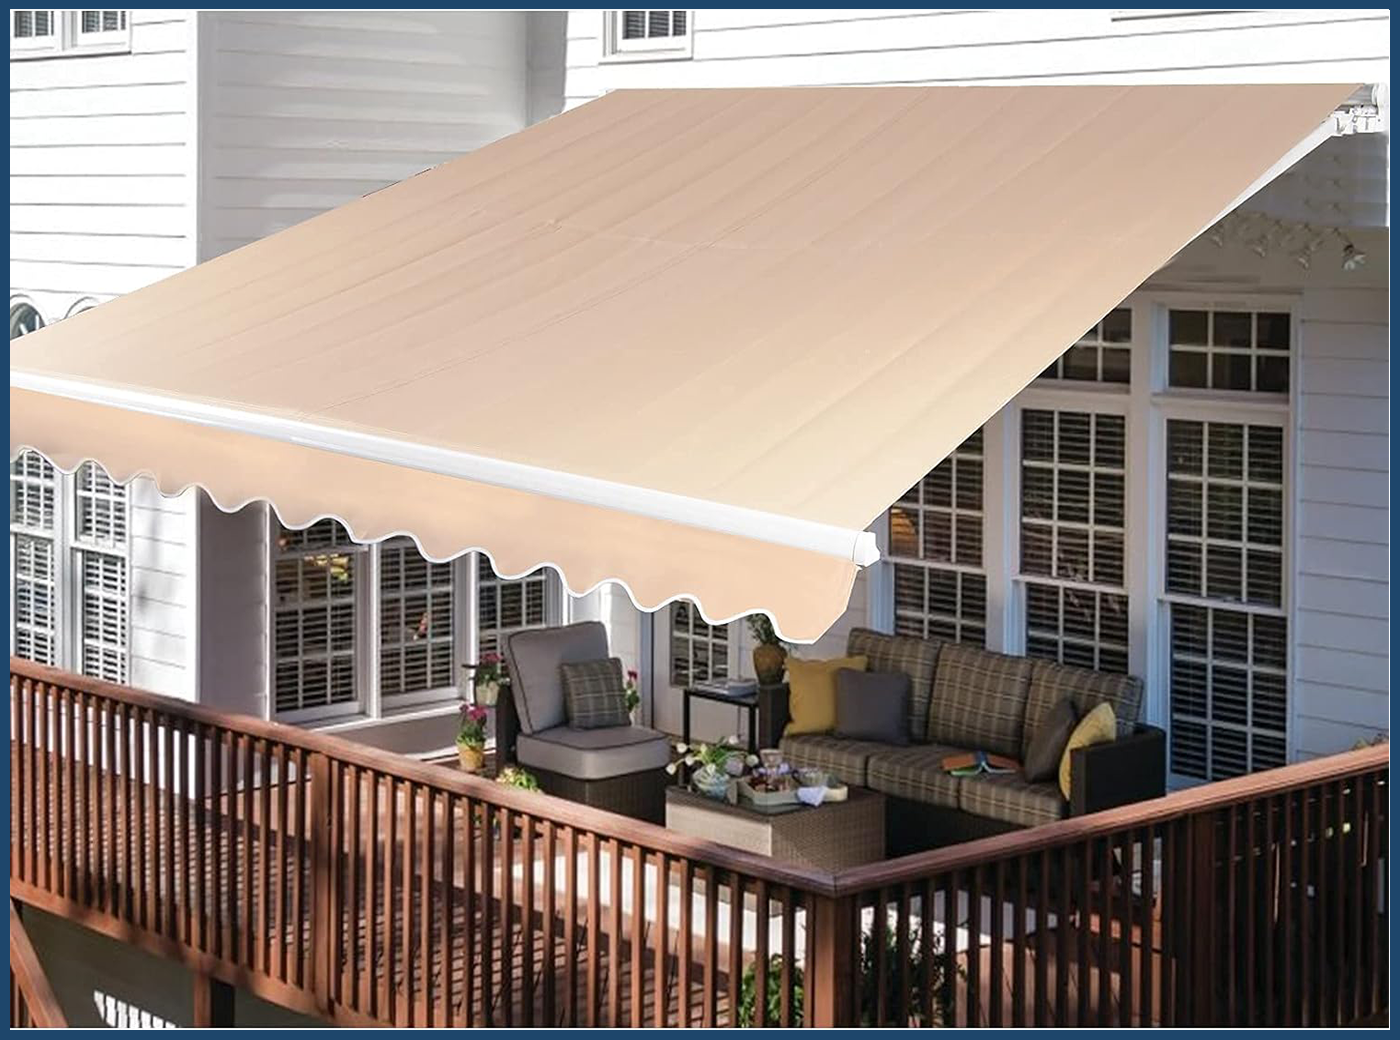 Outdoor awning, retractable awning, waterproof and UV resistant